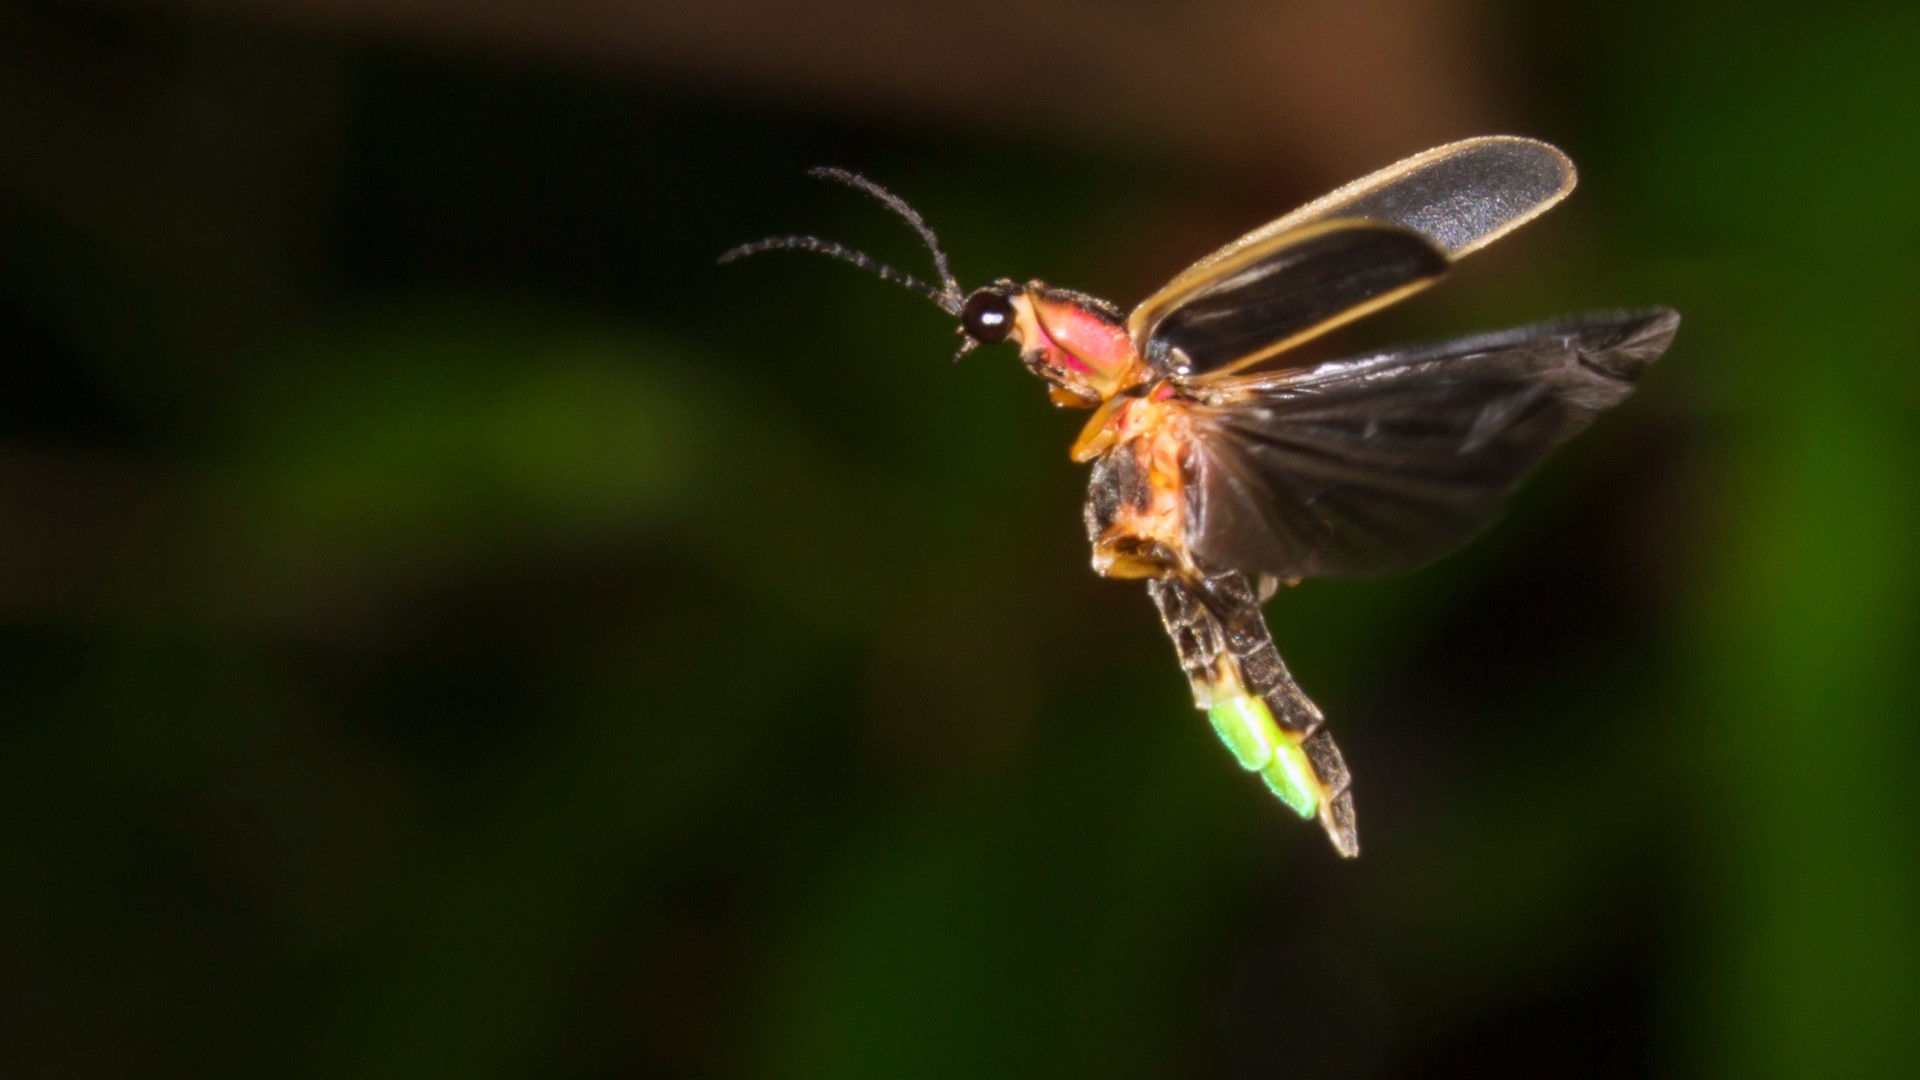 One group is asking for people nationwide to help count fireflies where they live to monitor trends in the insect's population.